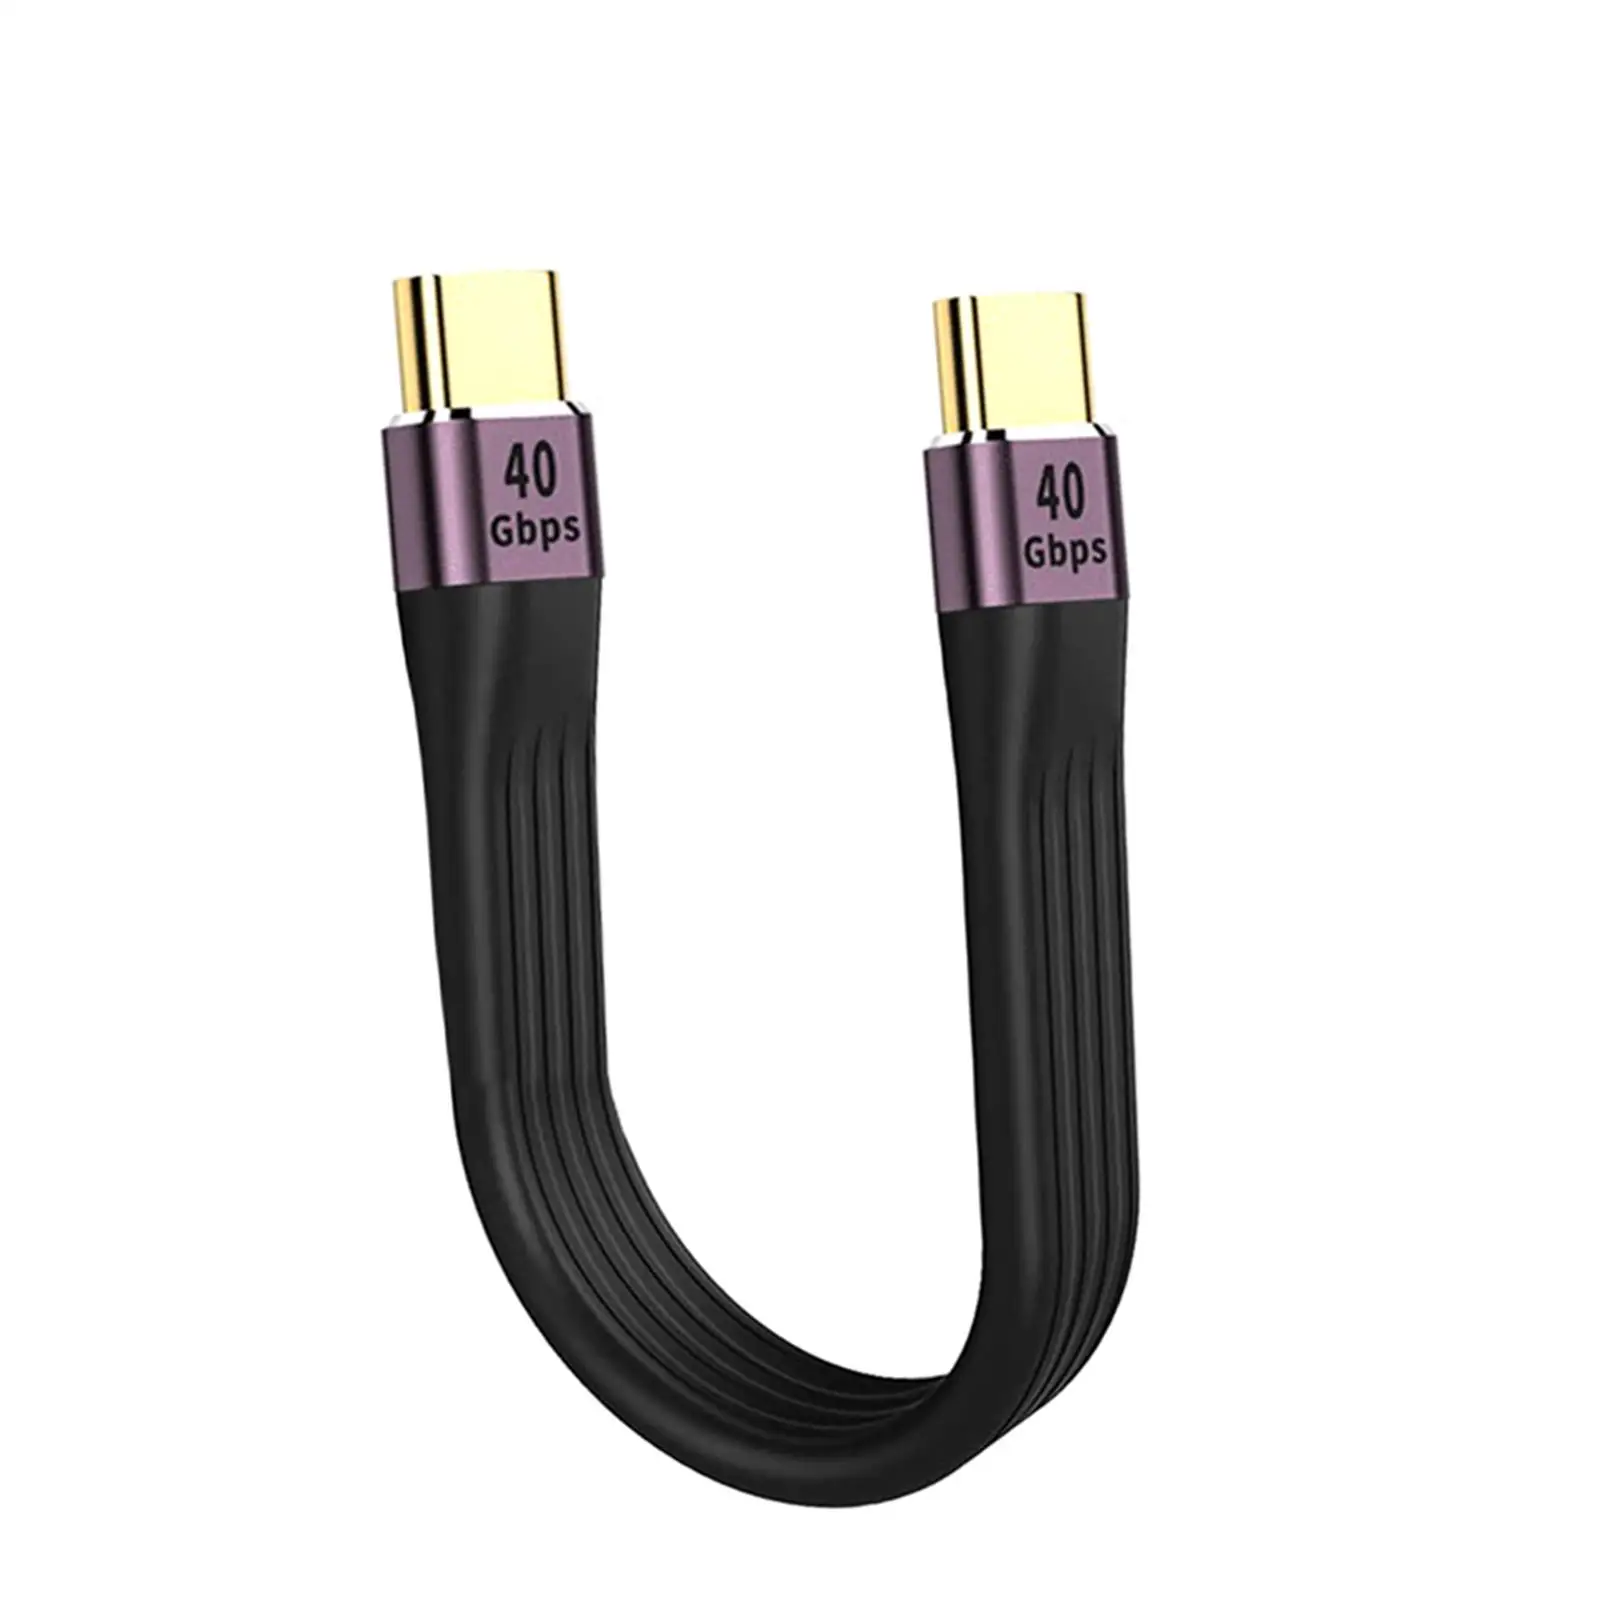 Short USB C Cable 100W 40Gbps Data Transfer data Fpc Design for 4/3 External SSD Phone